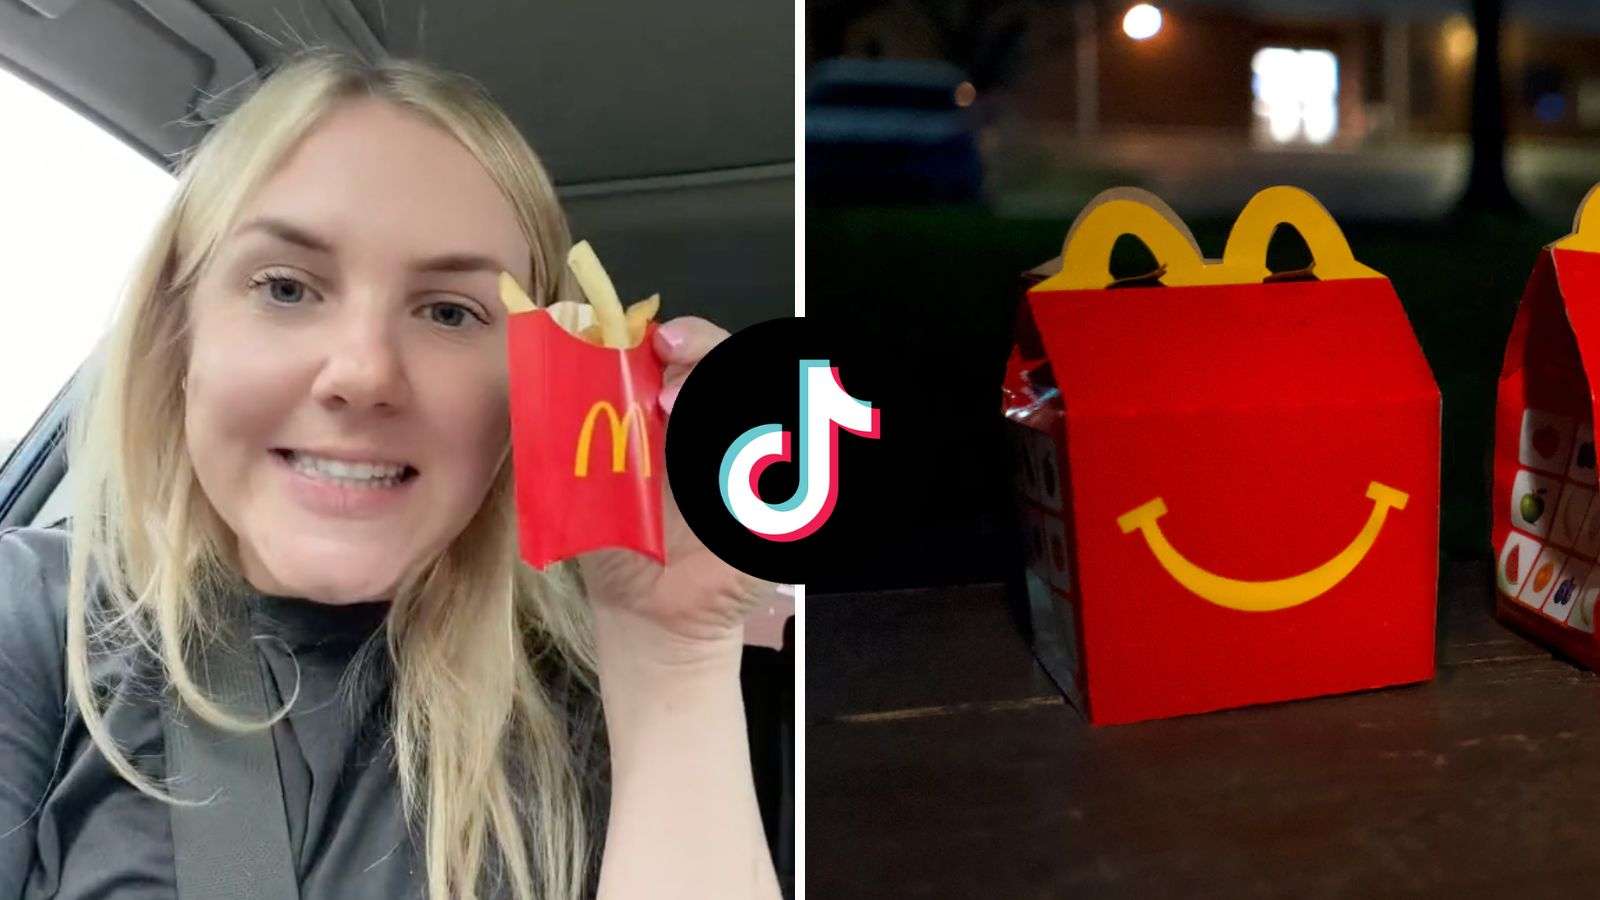 McDonald's customer showing her small Happy Meal fries